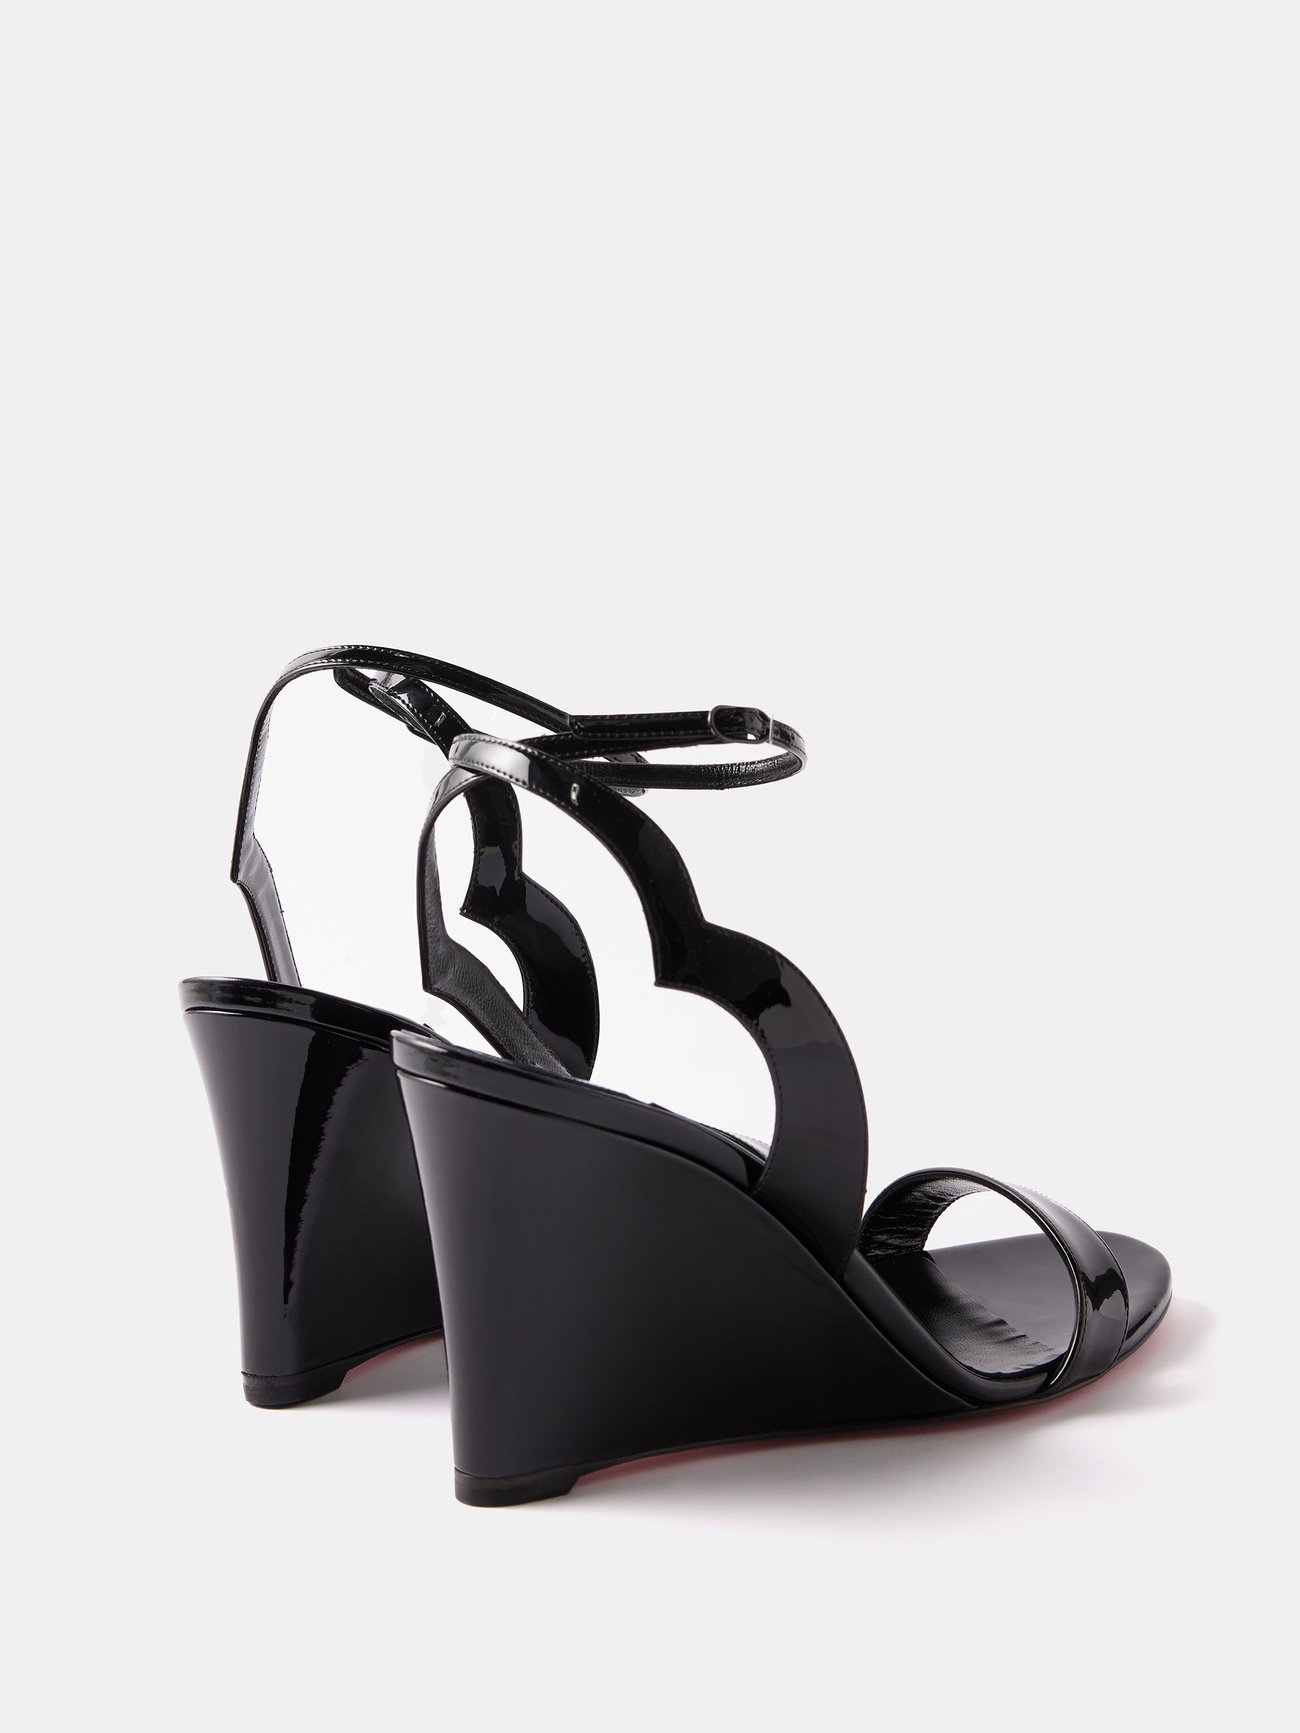 Zeppa Chick 85 patent-leather wedge sandals